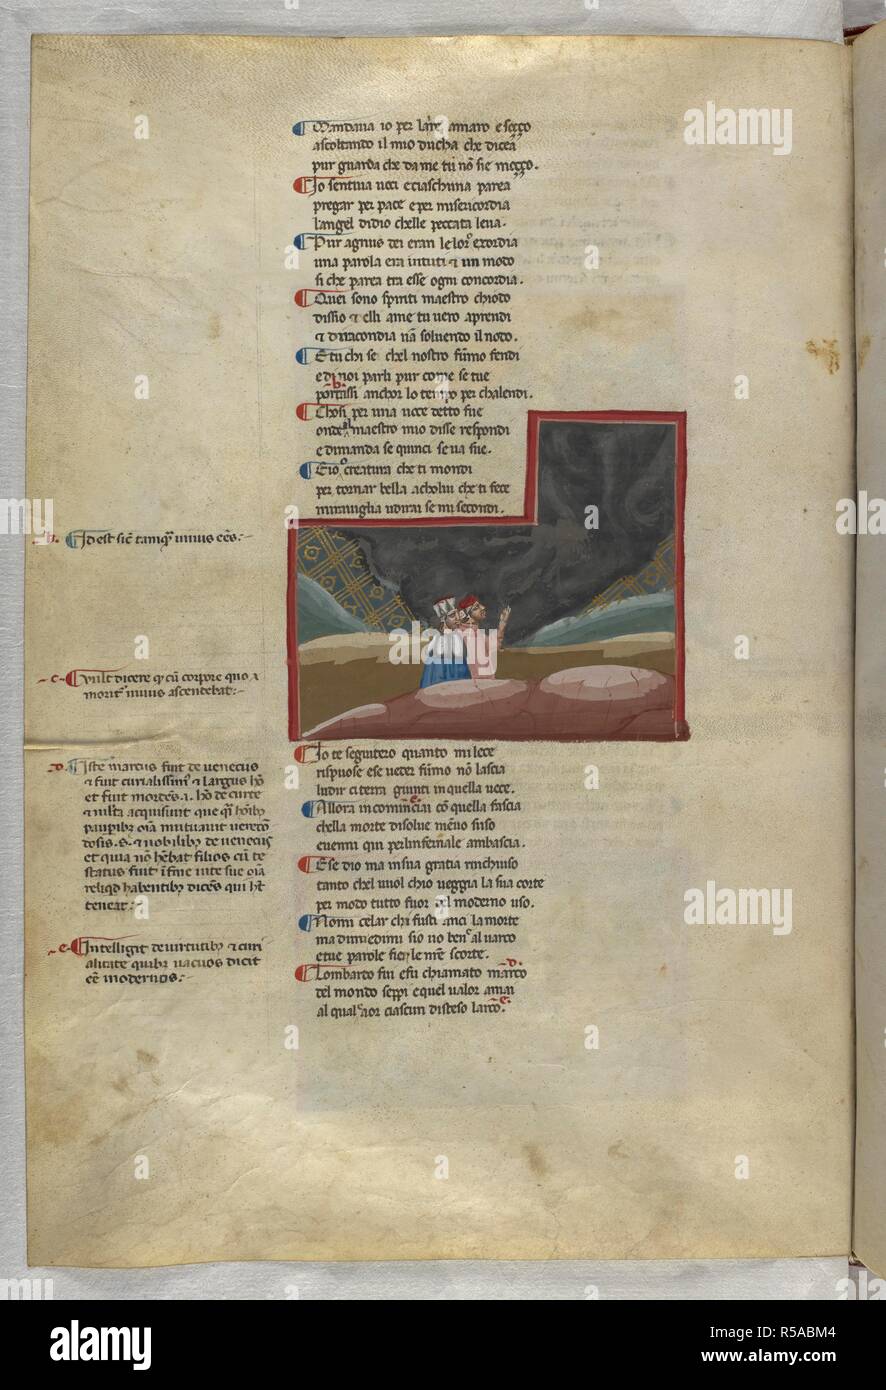 Purgatorio: Dante talks to one of the angry souls. Dante Alighieri, Divina Commedia ( The Divine Comedy ), with a commentary in Latin. 1st half of the 14th century. Source: Egerton 943, f.91v. Language: Italian, Latin. Stock Photo